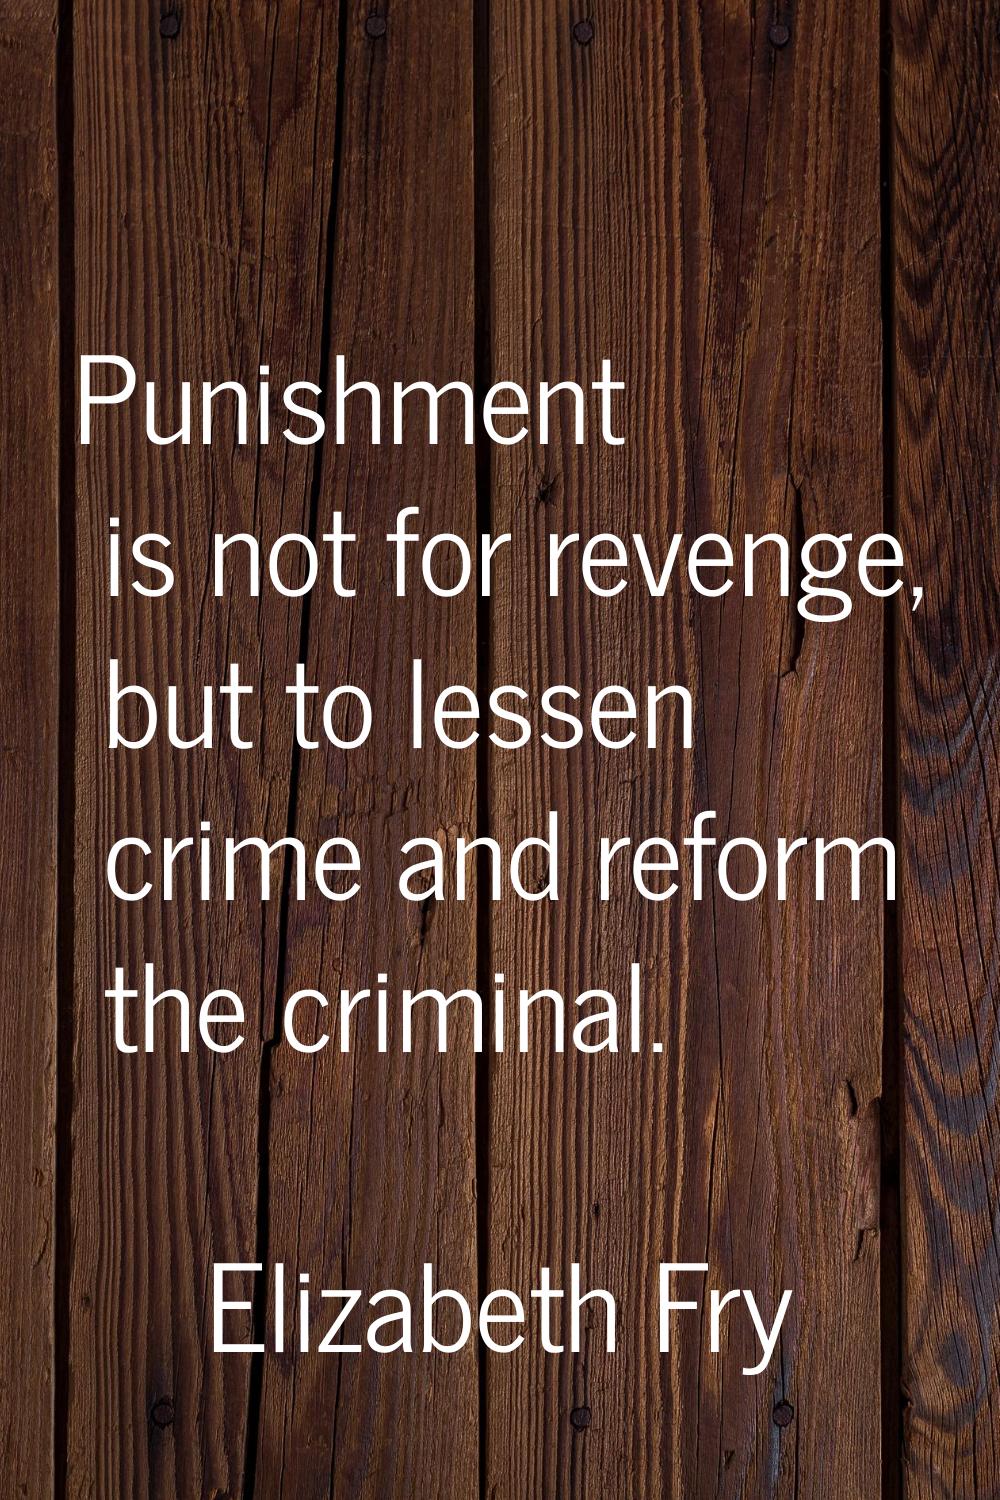 Punishment is not for revenge, but to lessen crime and reform the criminal.